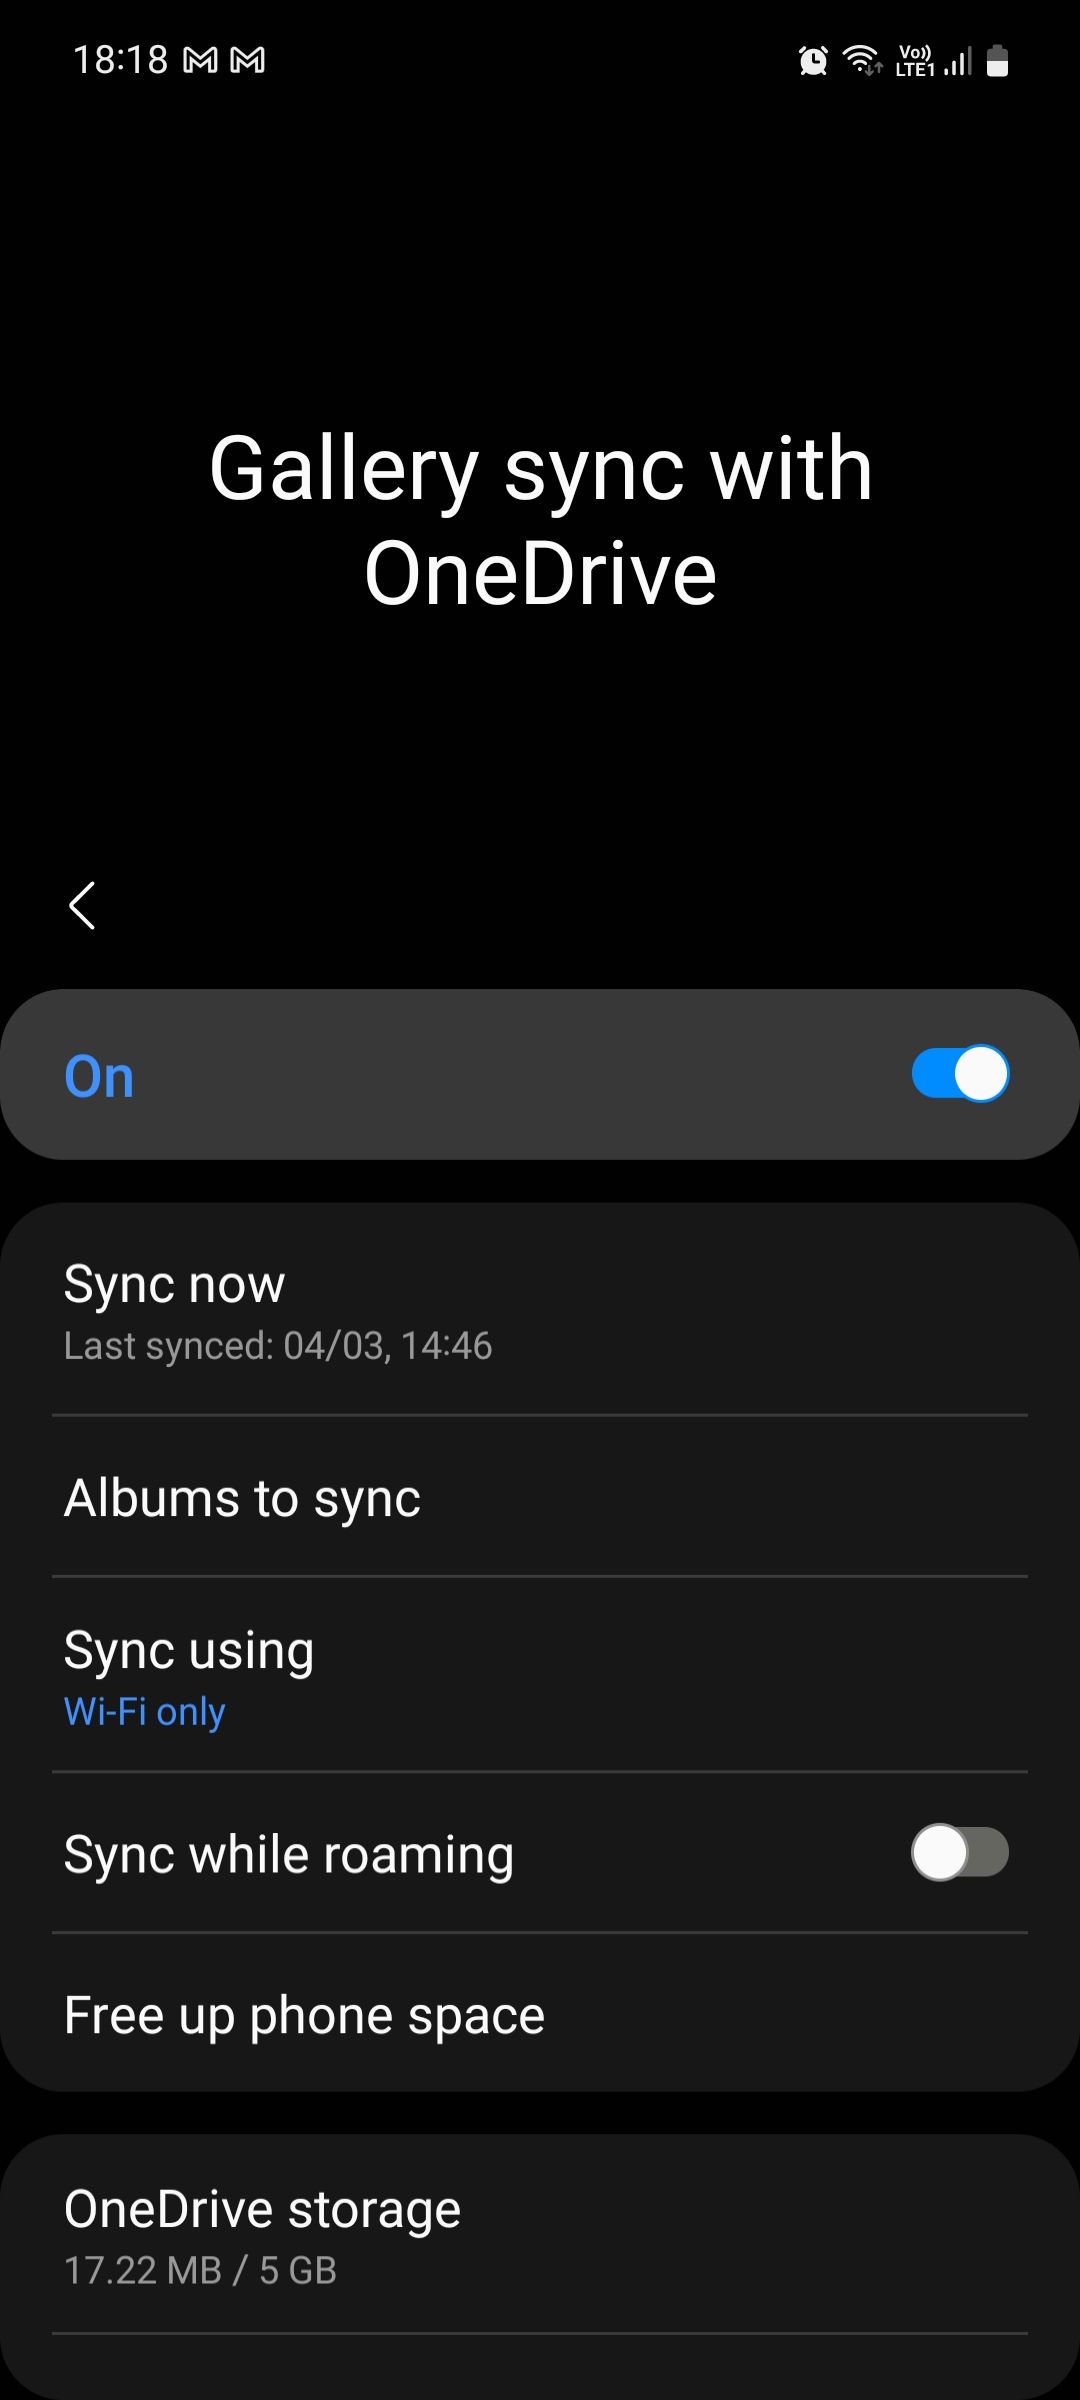 Gallery sync with OneDrive